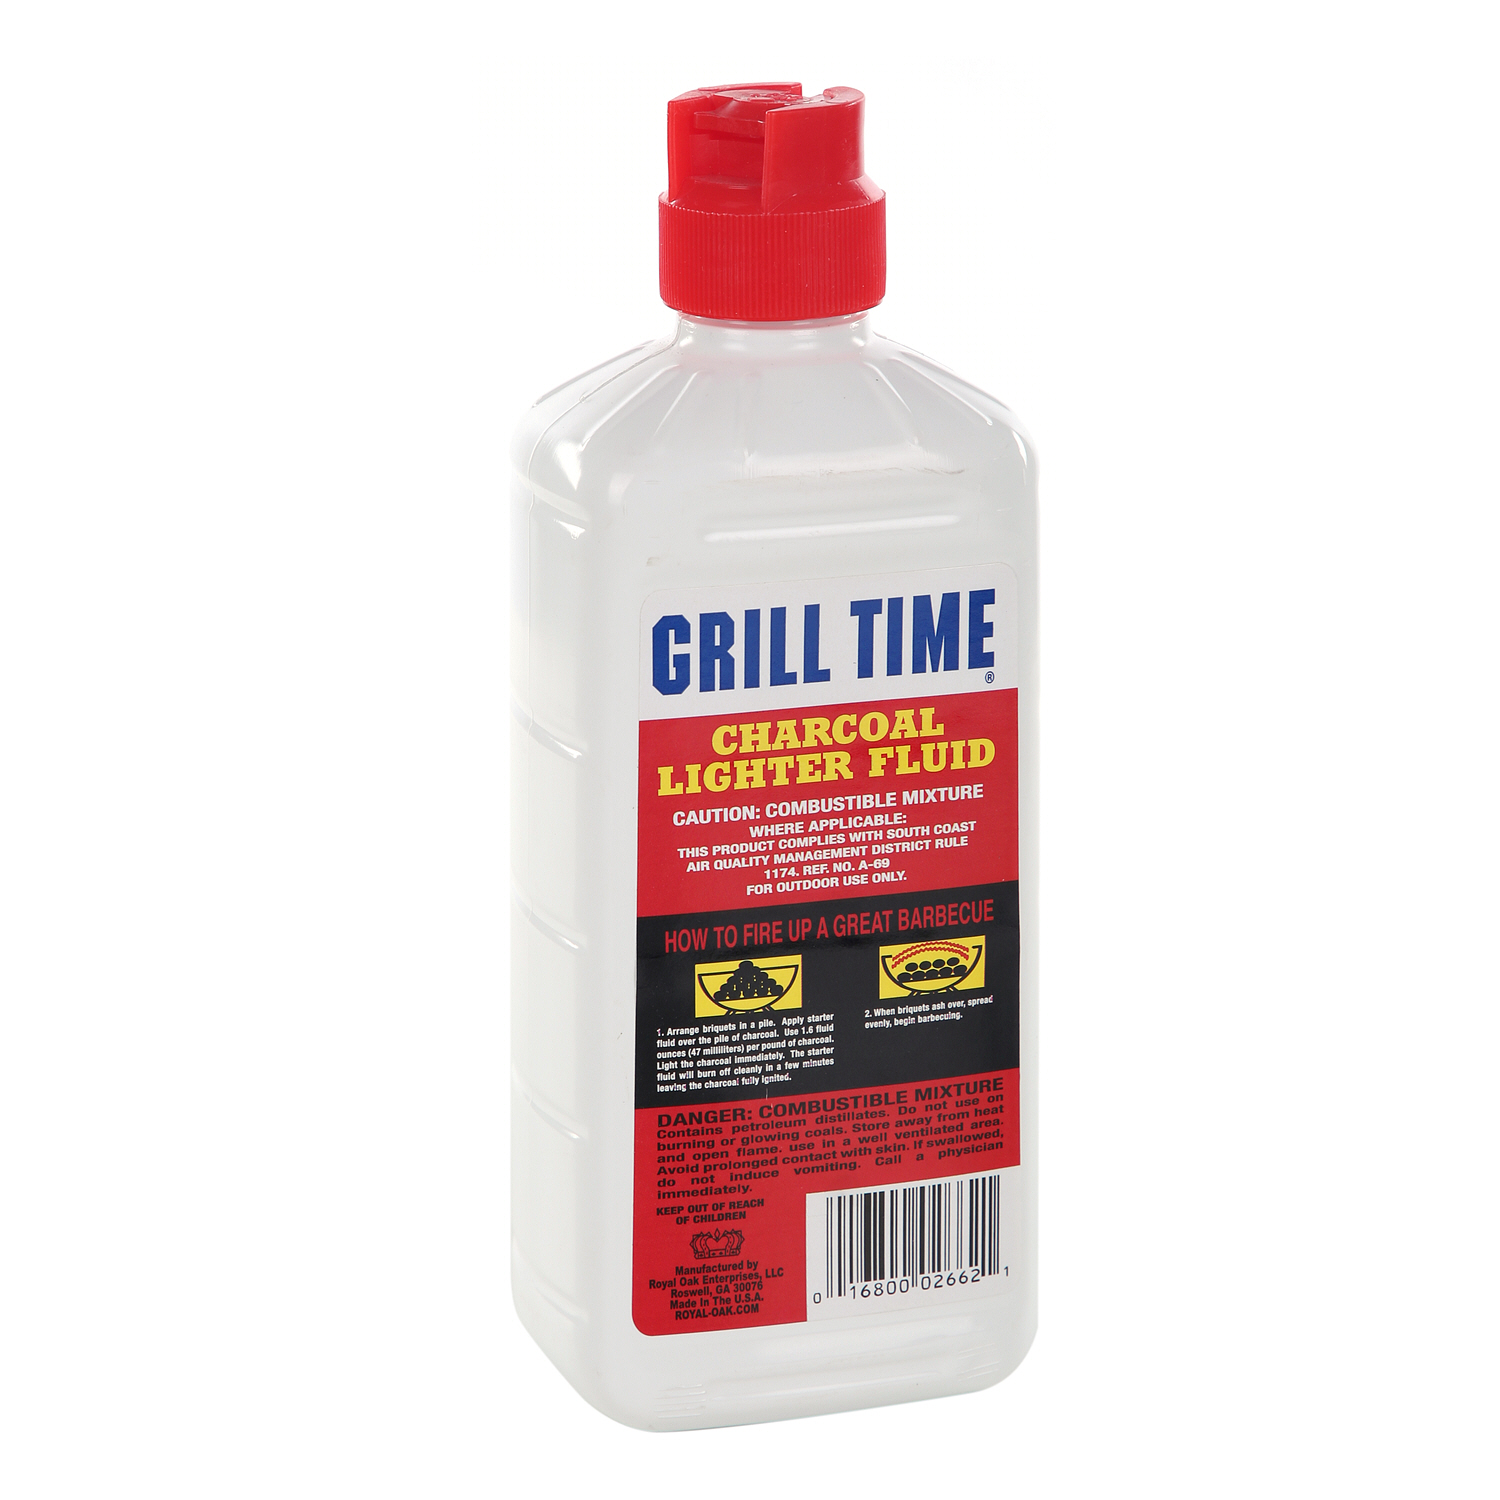 Grill Time Charcoal Lighter 16 Oz